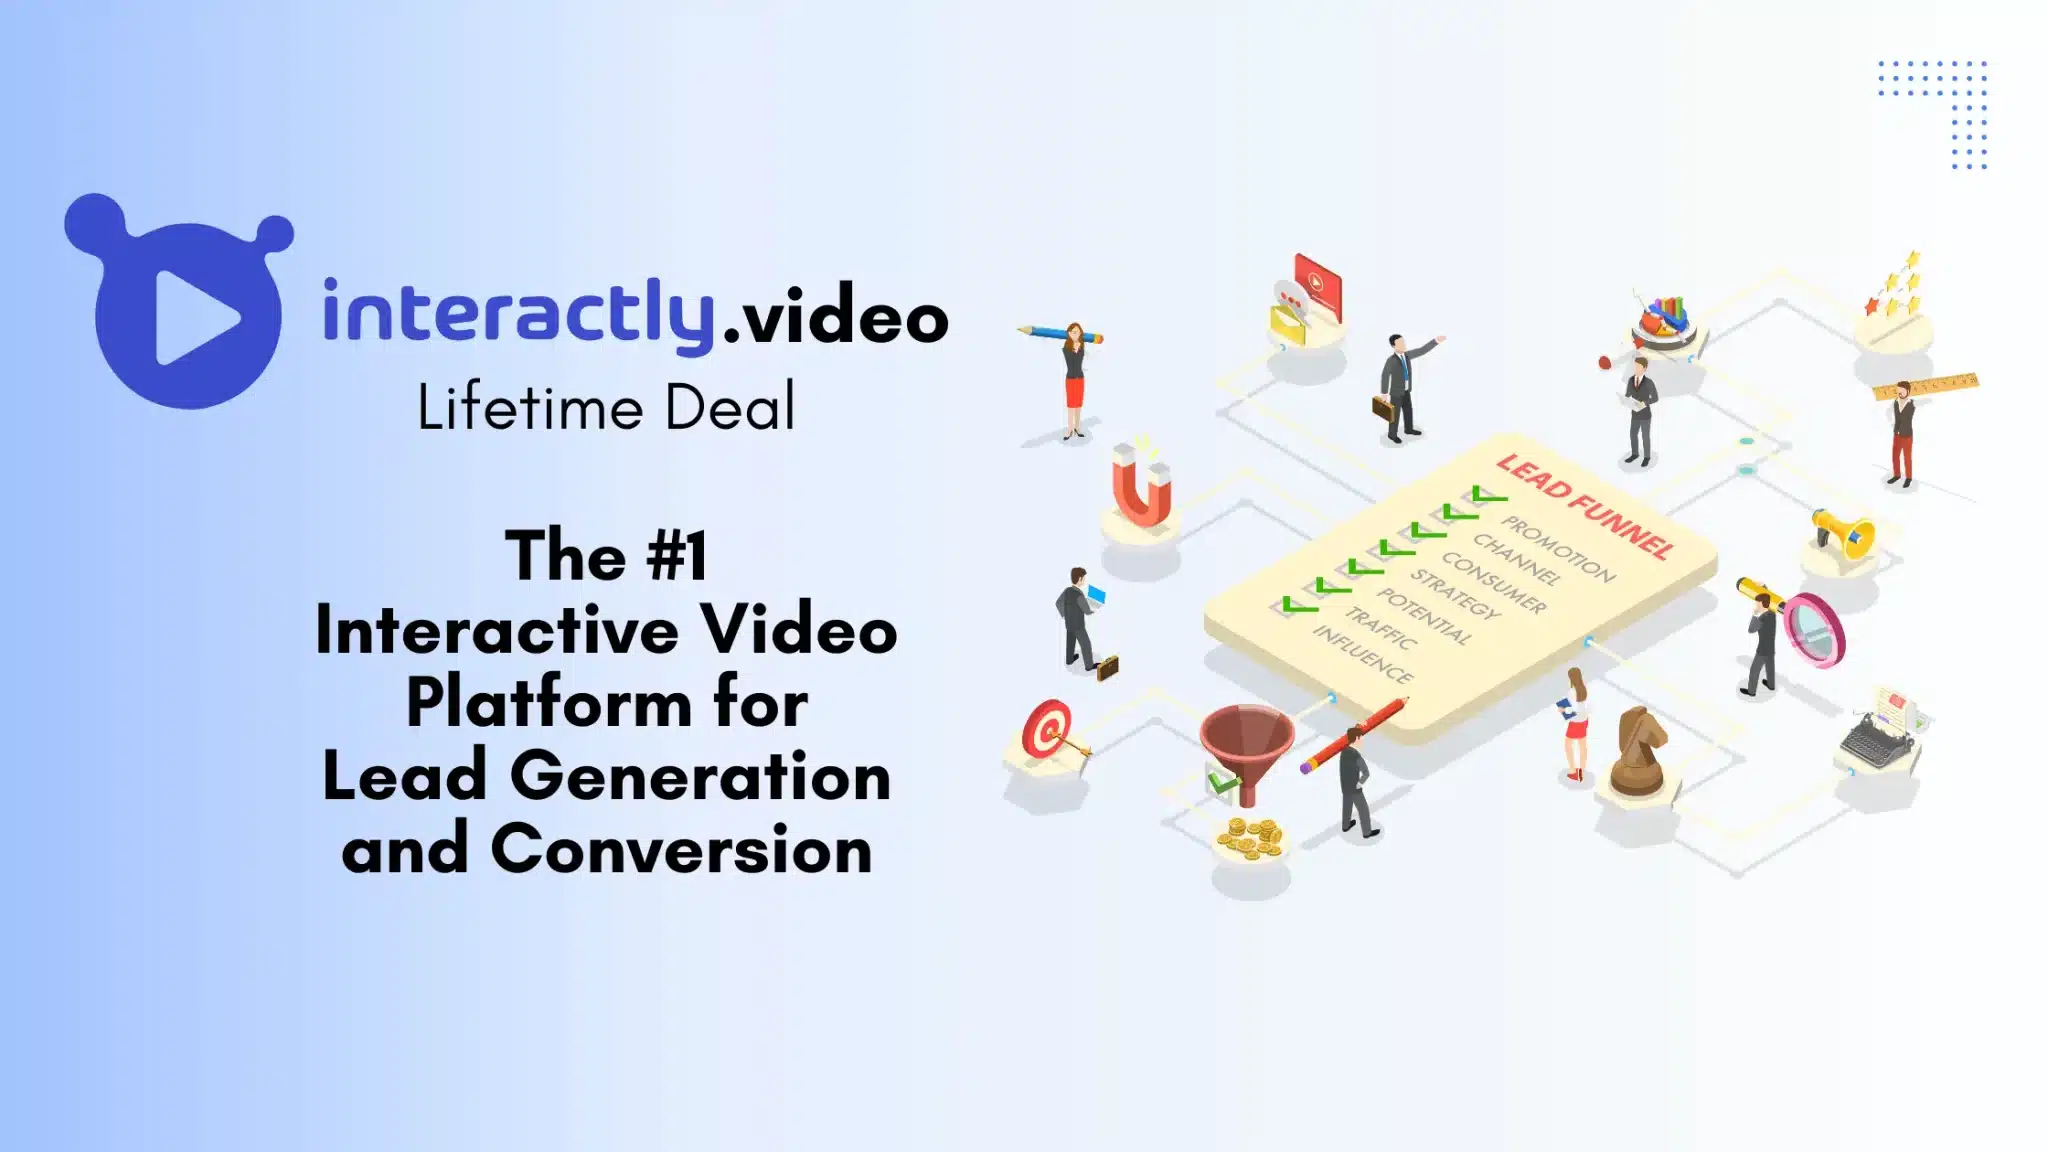 Interacly.video Lifetime Deal